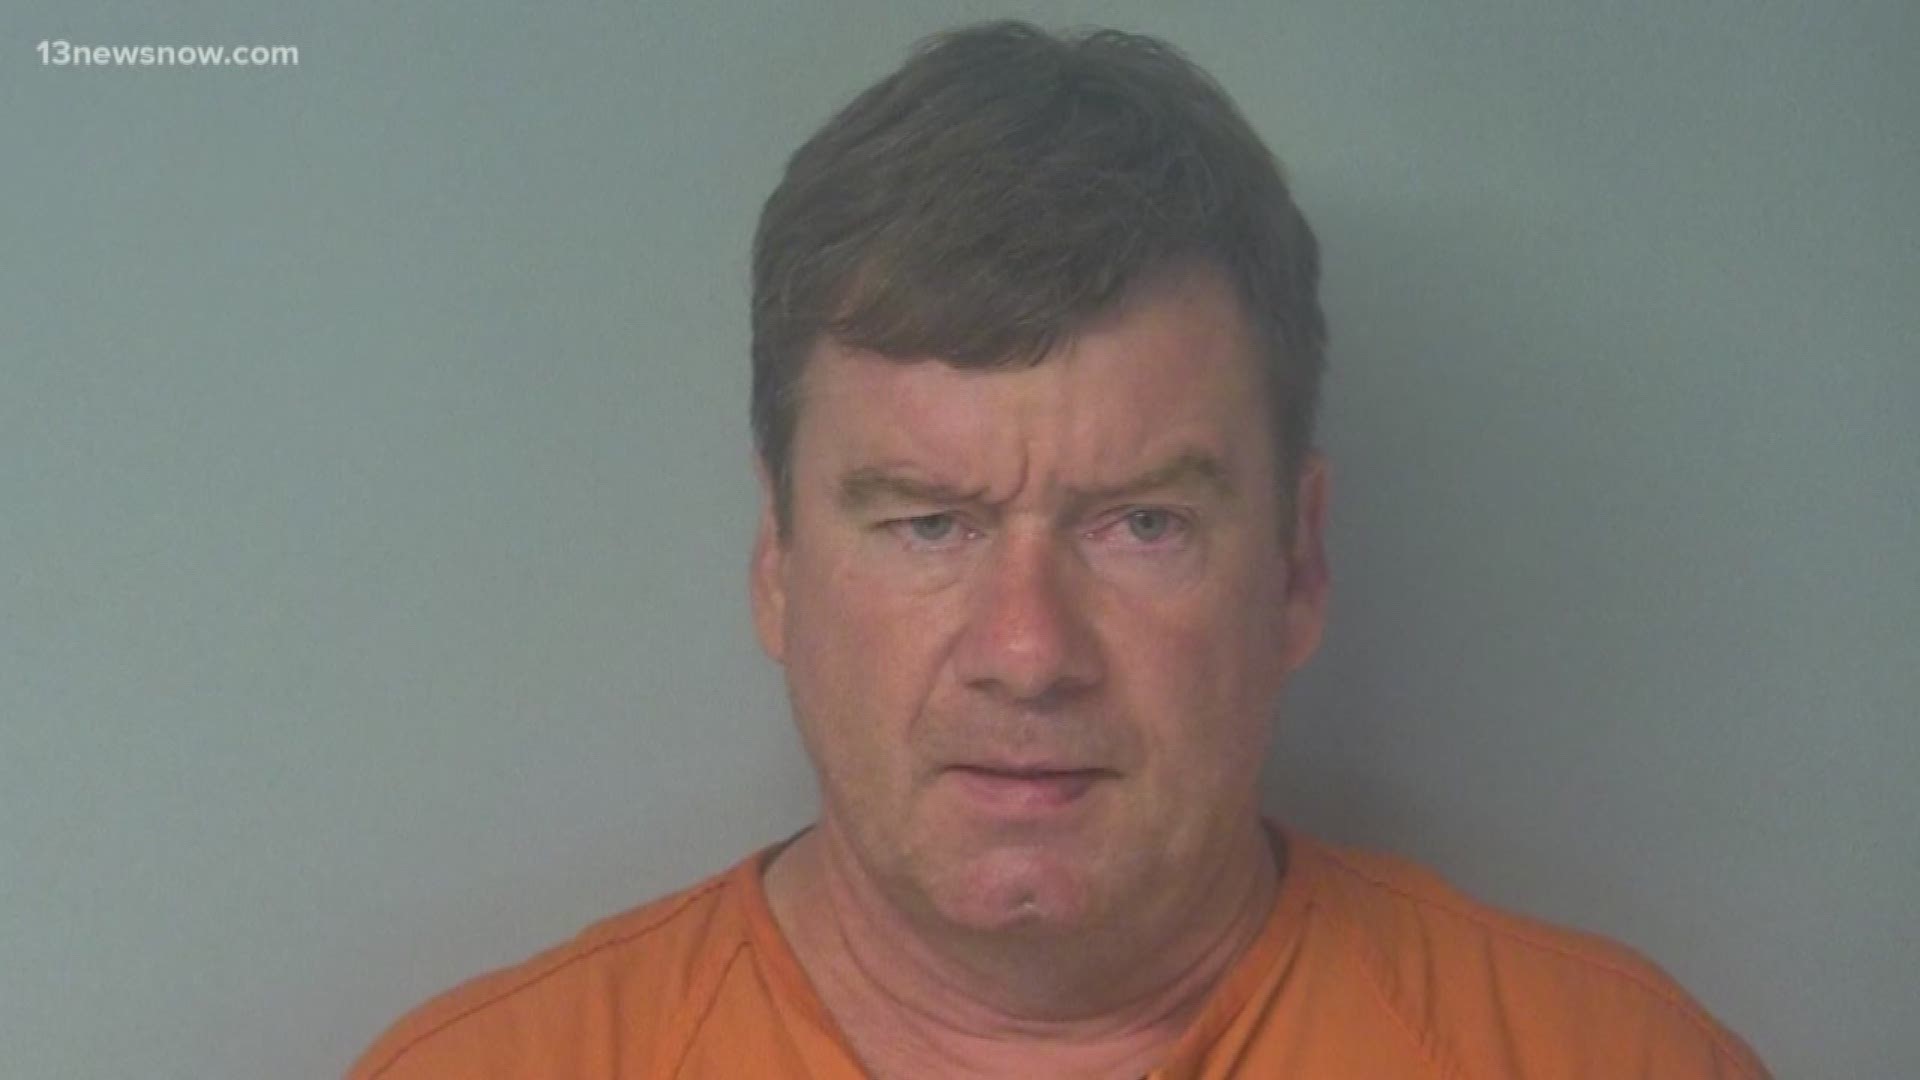 Two girls accused James Concannon of touching their breasts. Officers said they believed Concannon was drinking.